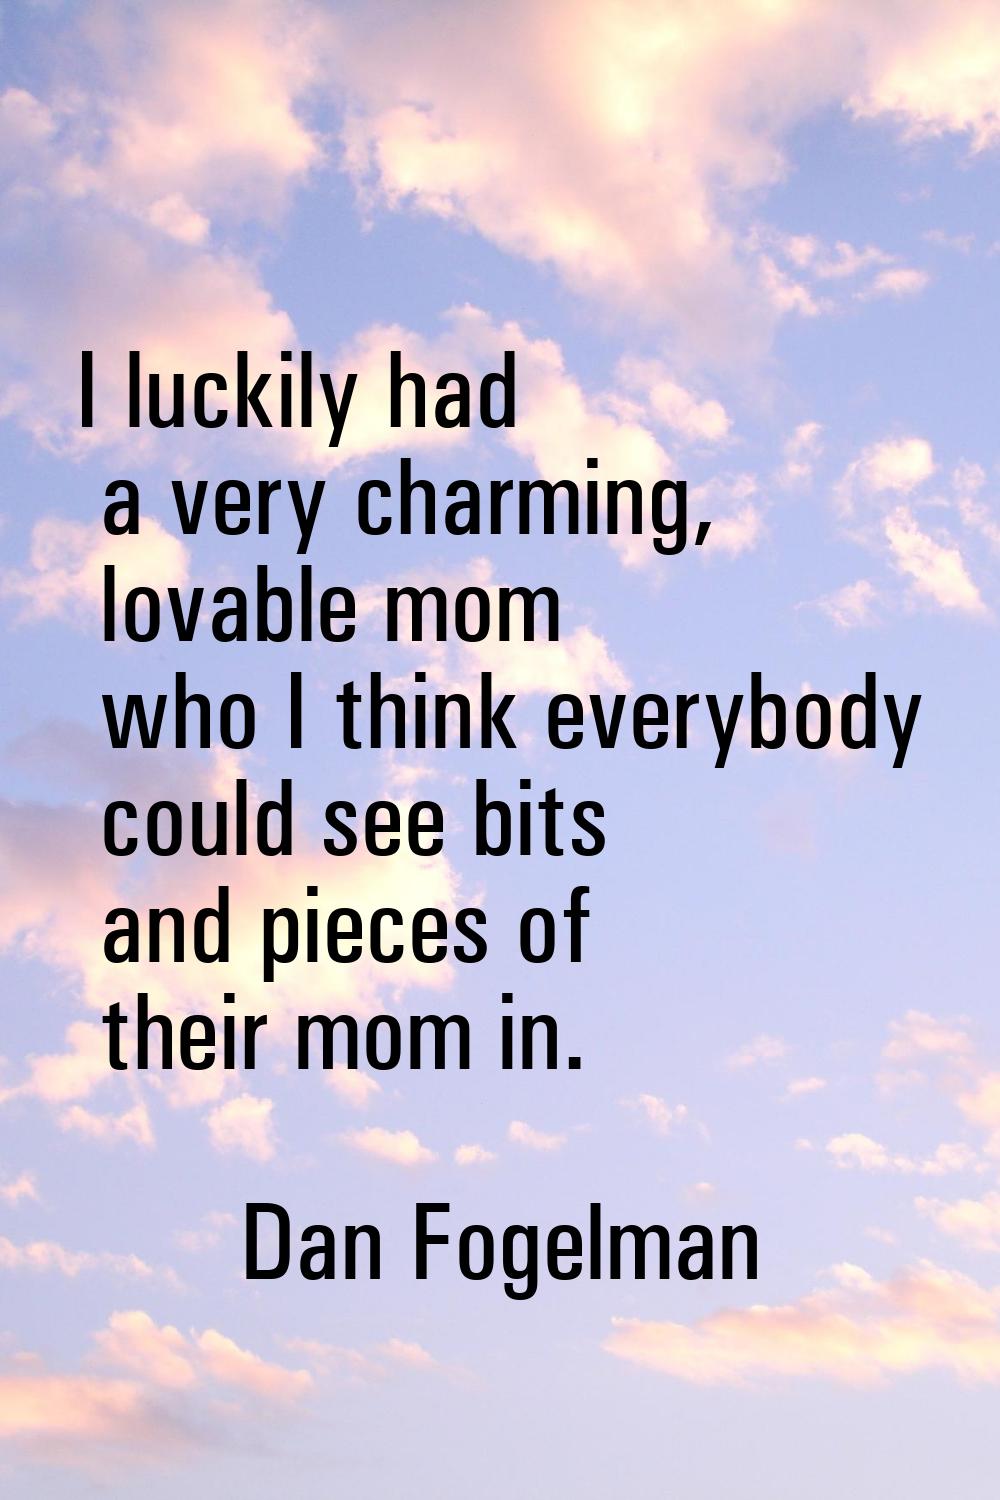 I luckily had a very charming, lovable mom who I think everybody could see bits and pieces of their